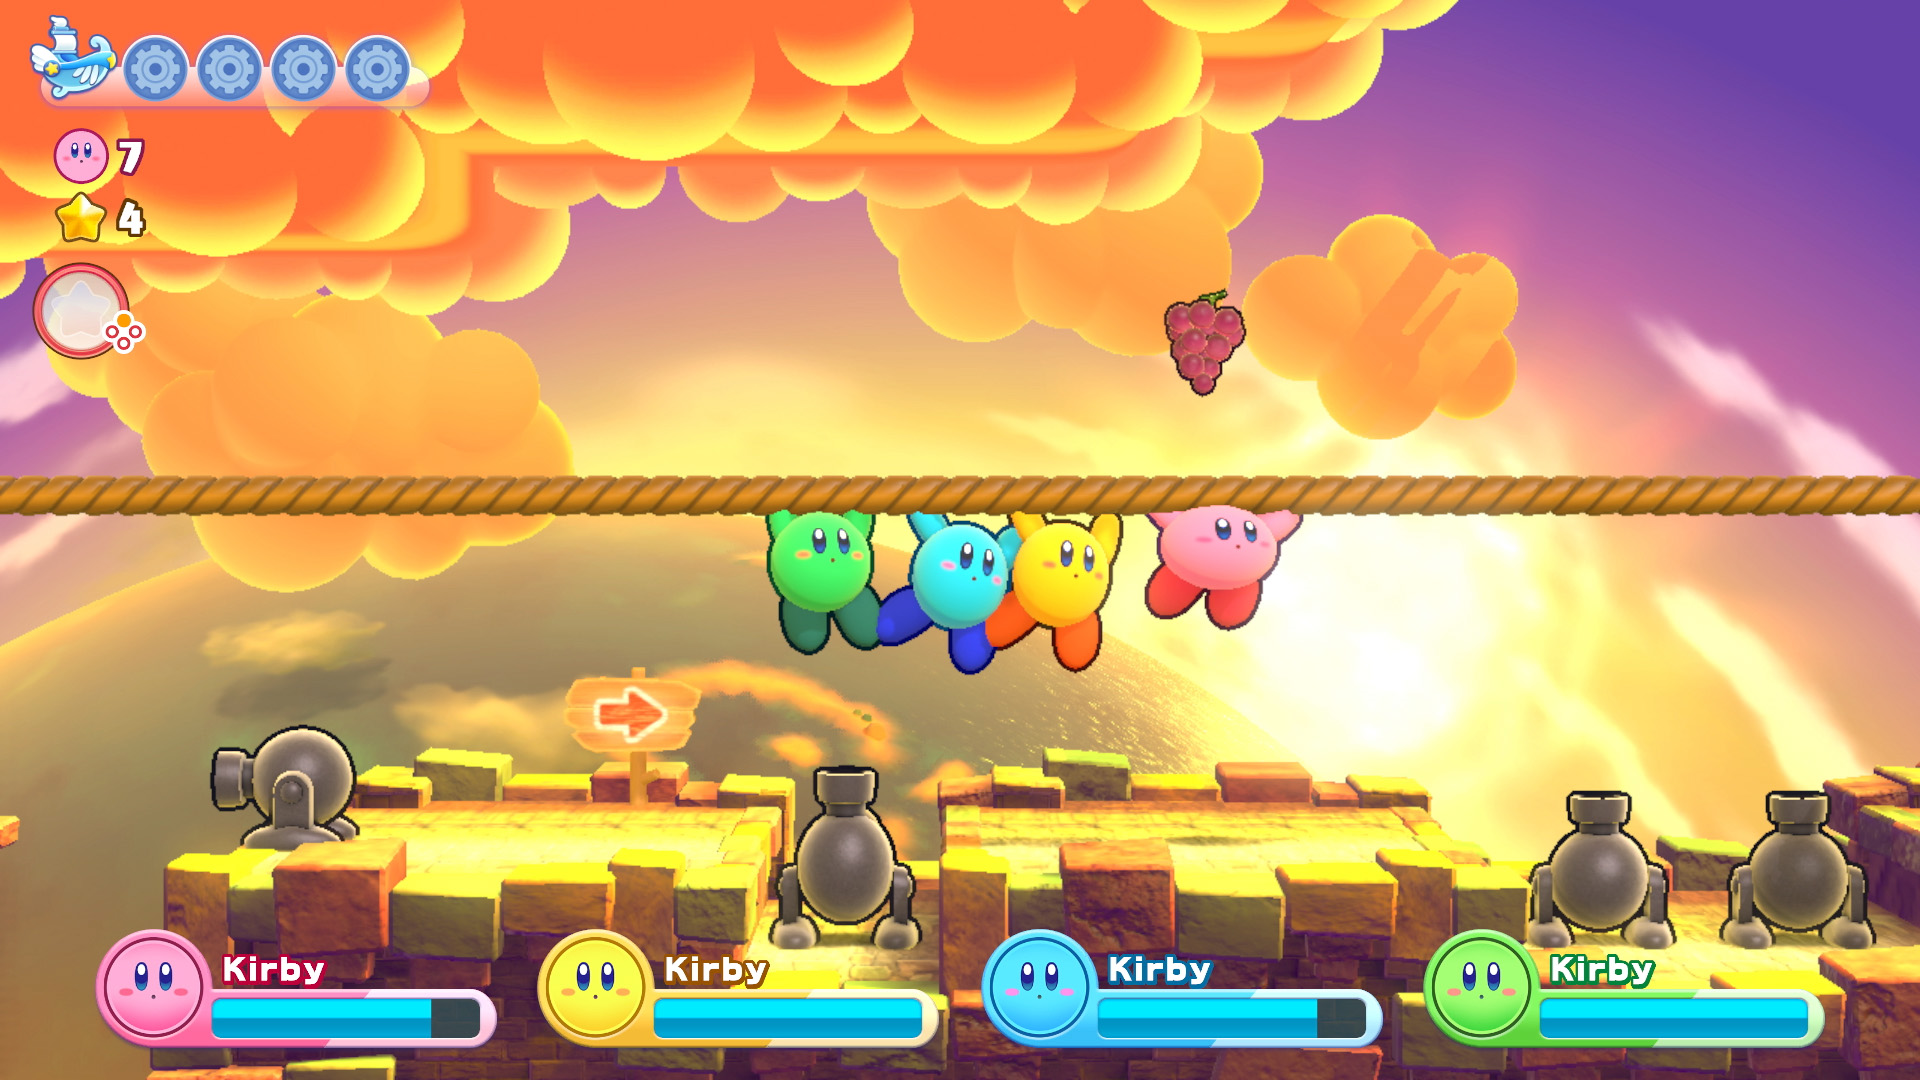 Kirby's Return to Dream Land Deluxe Nintendo Switch Account pixelpuffin.net Activation Link, 37.28 usd